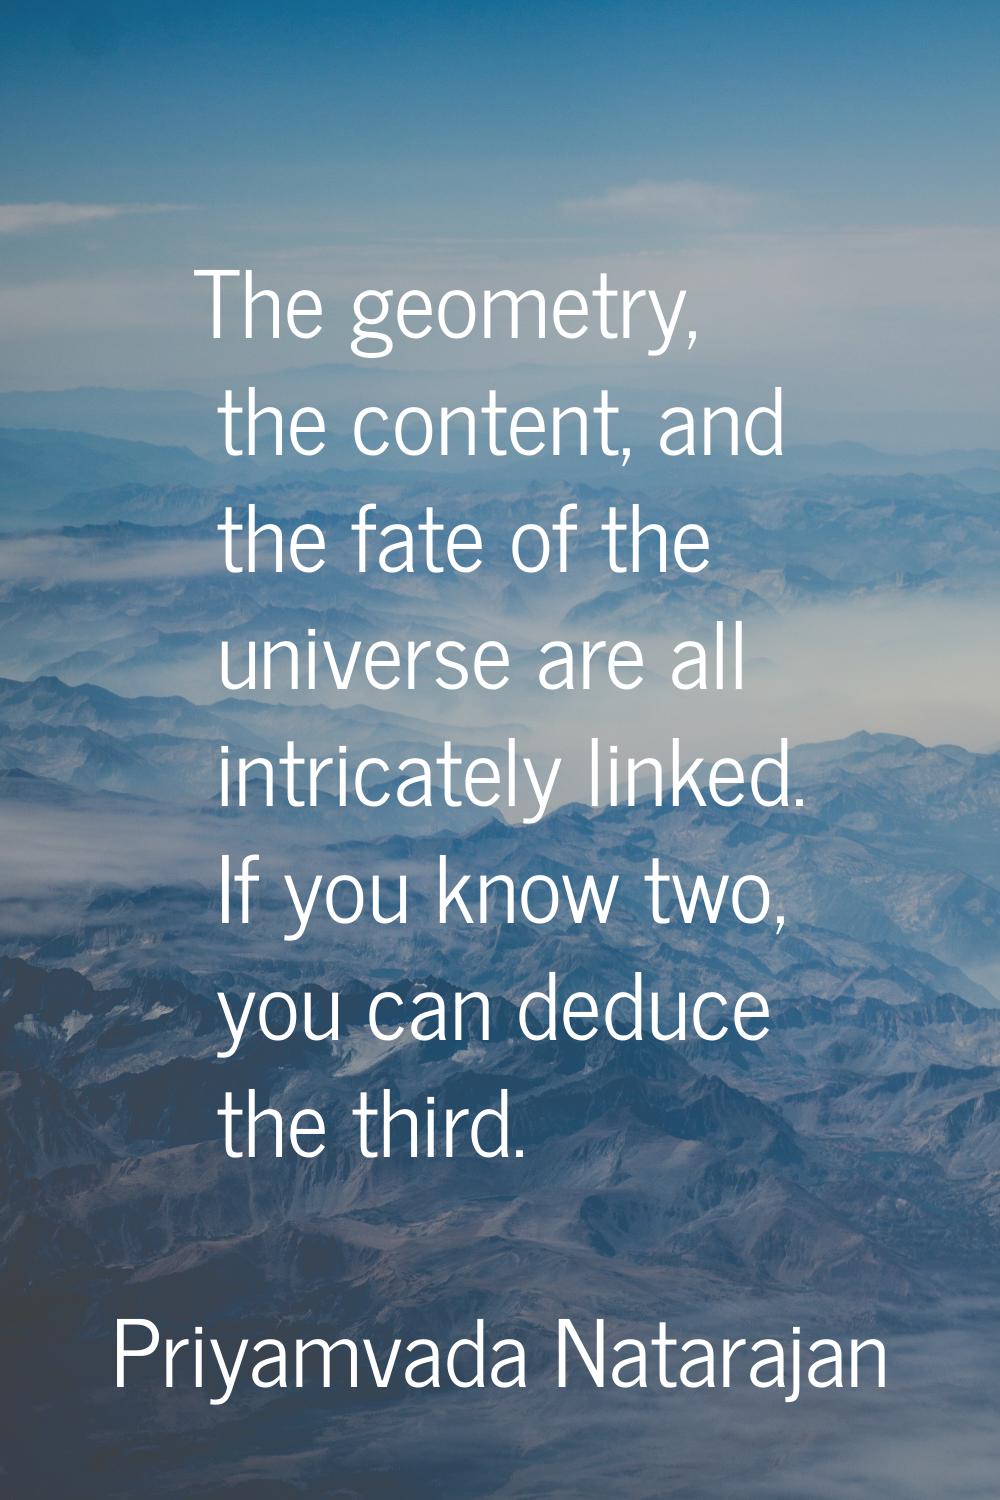 The geometry, the content, and the fate of the universe are all intricately linked. If you know two